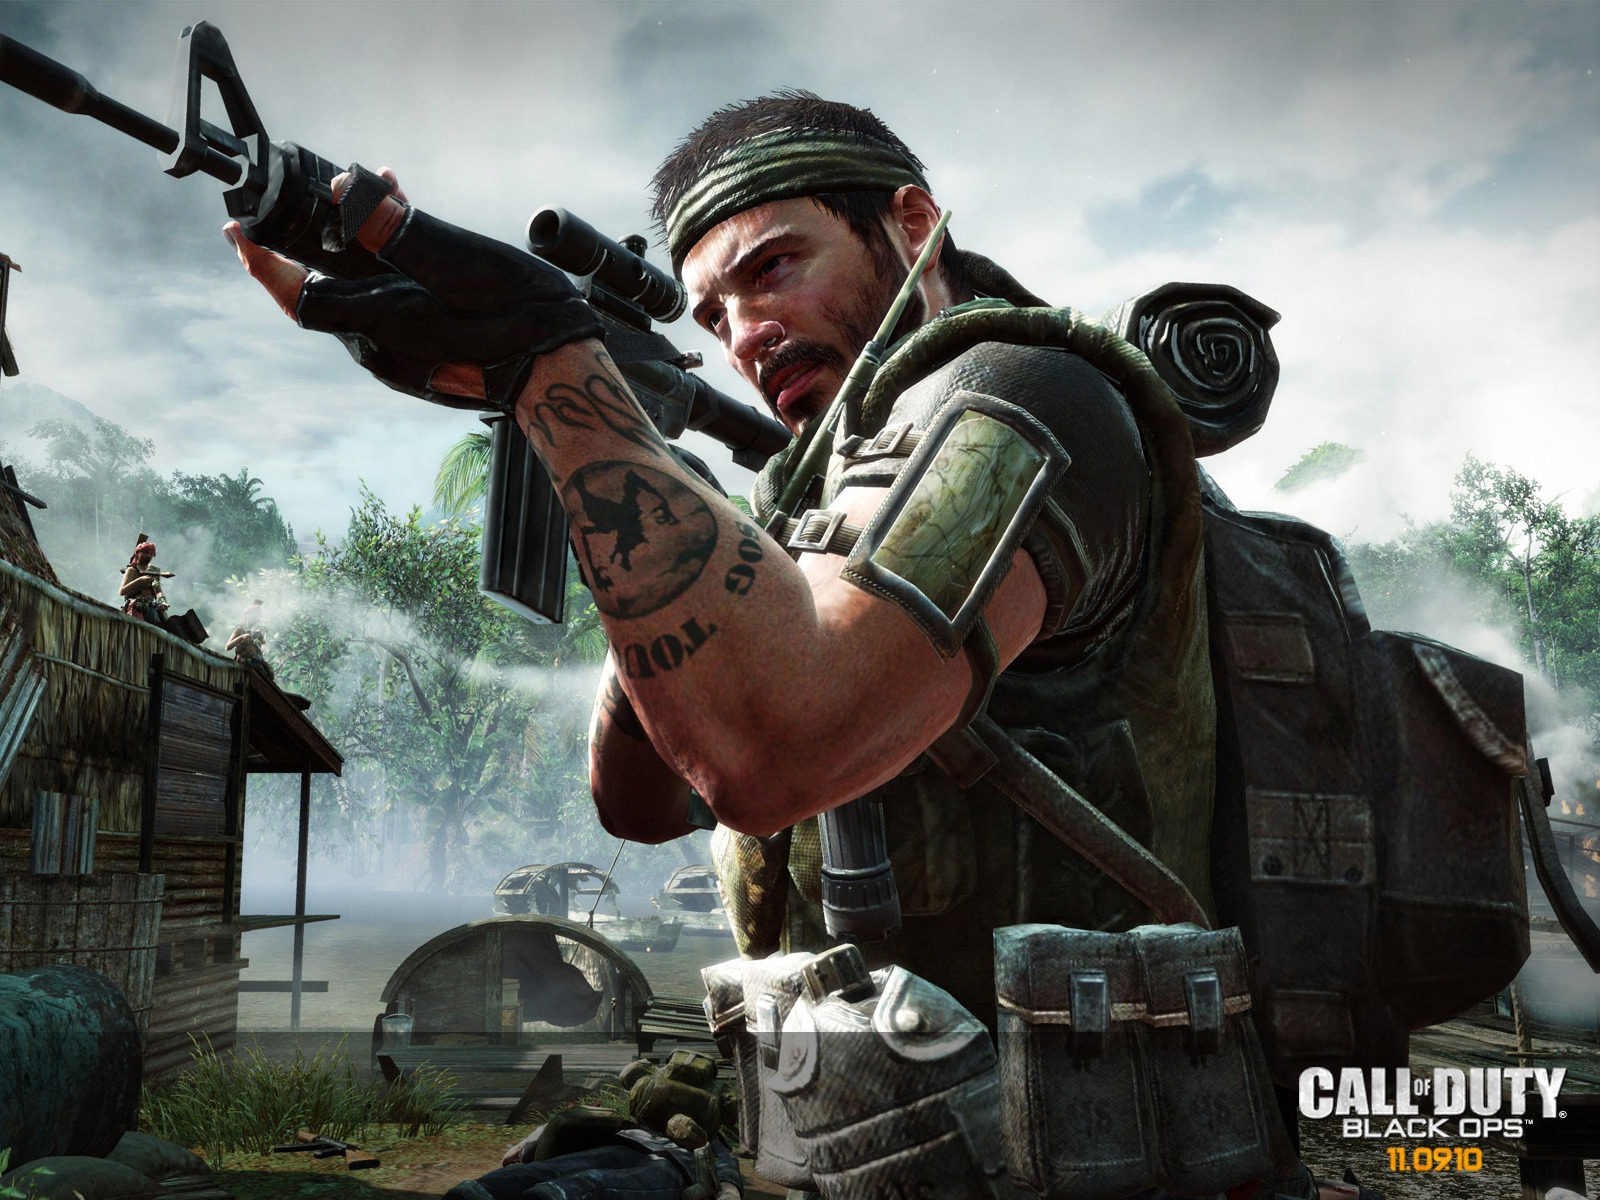 Call of Duty Black Ops Soldier for 1600 x 1200 resolution